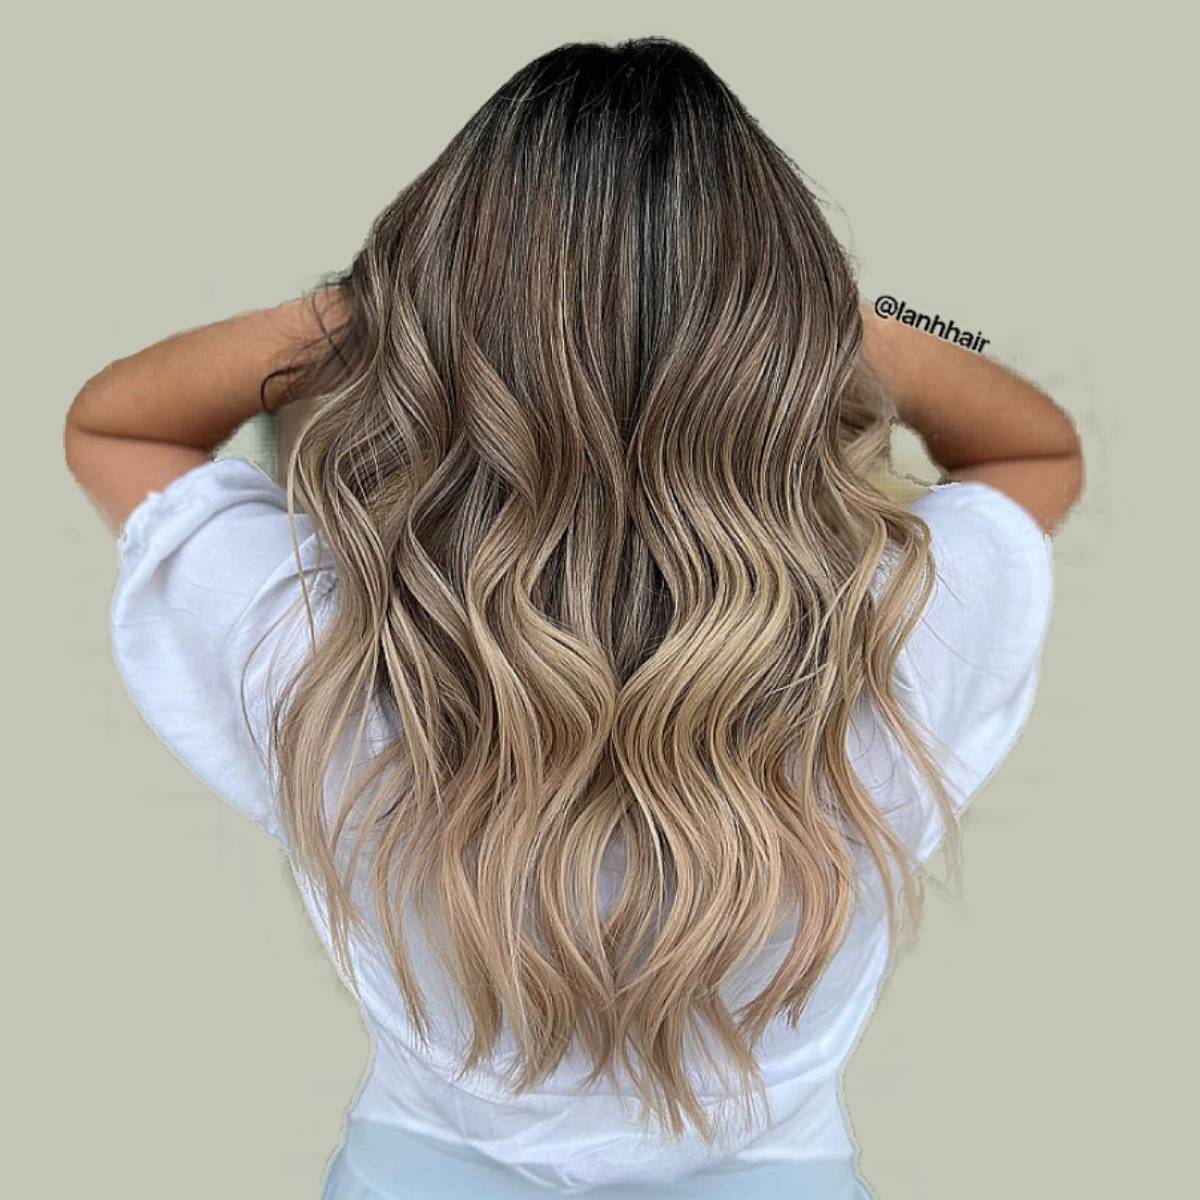 34 Trendy Yellow Ombre Hair Colors Ideas  Yellow hair color, Ombre hair  color, Hair color for women